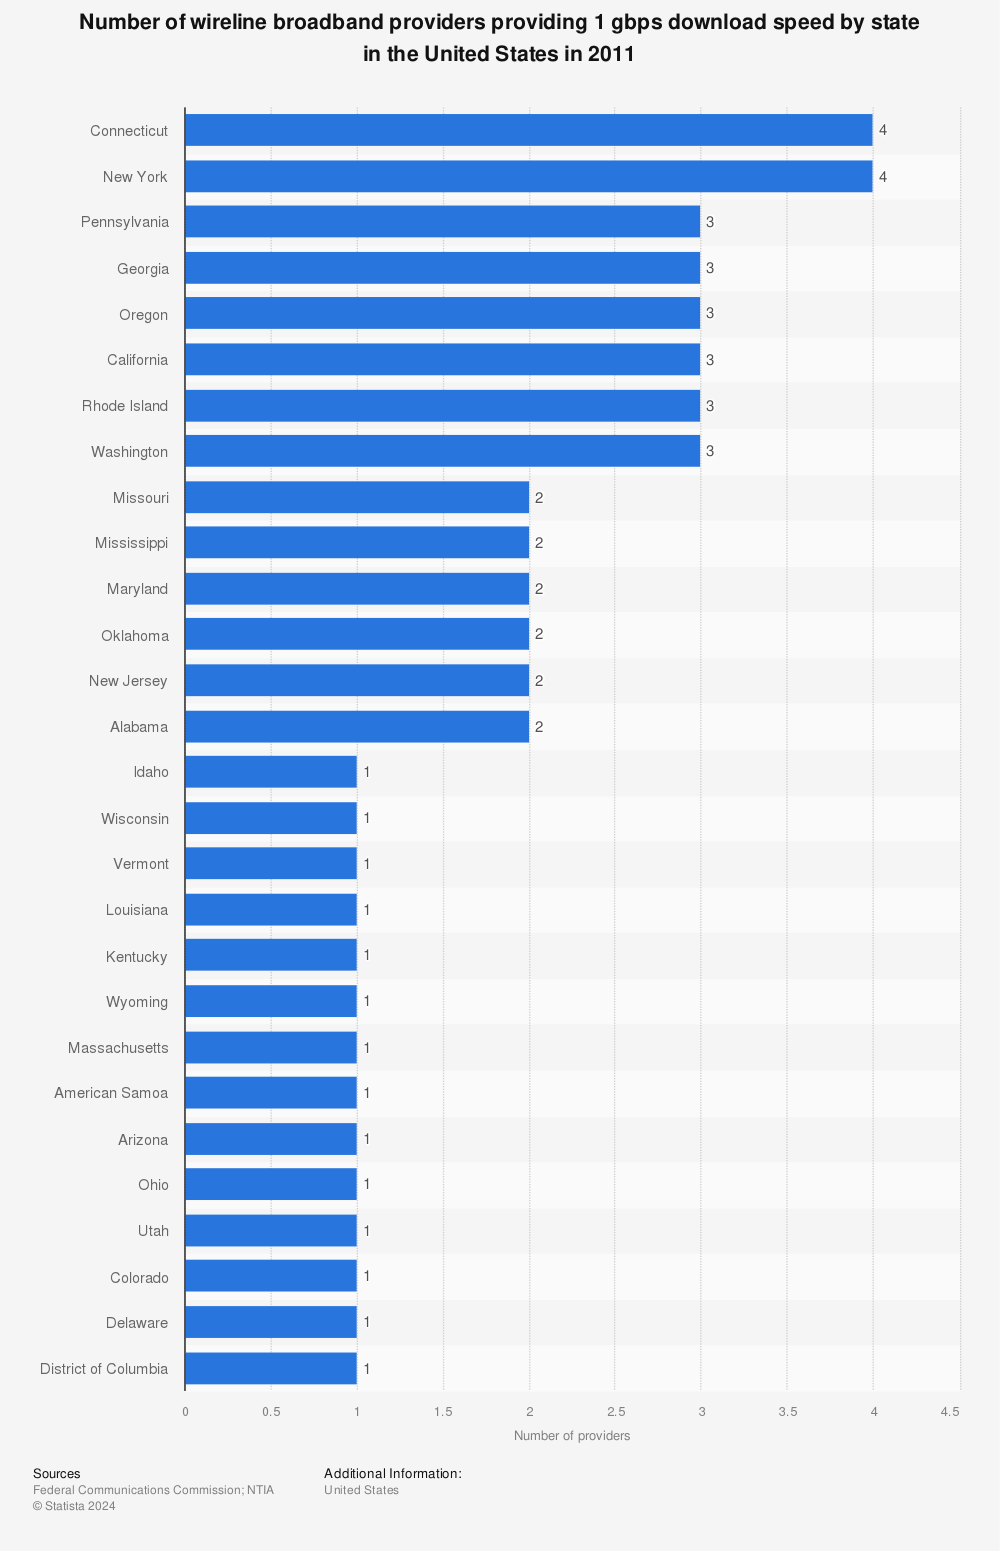 Statistic: Number of wireline broadband providers providing 1 gbps download speed by state in the United States in 2011 | Statista